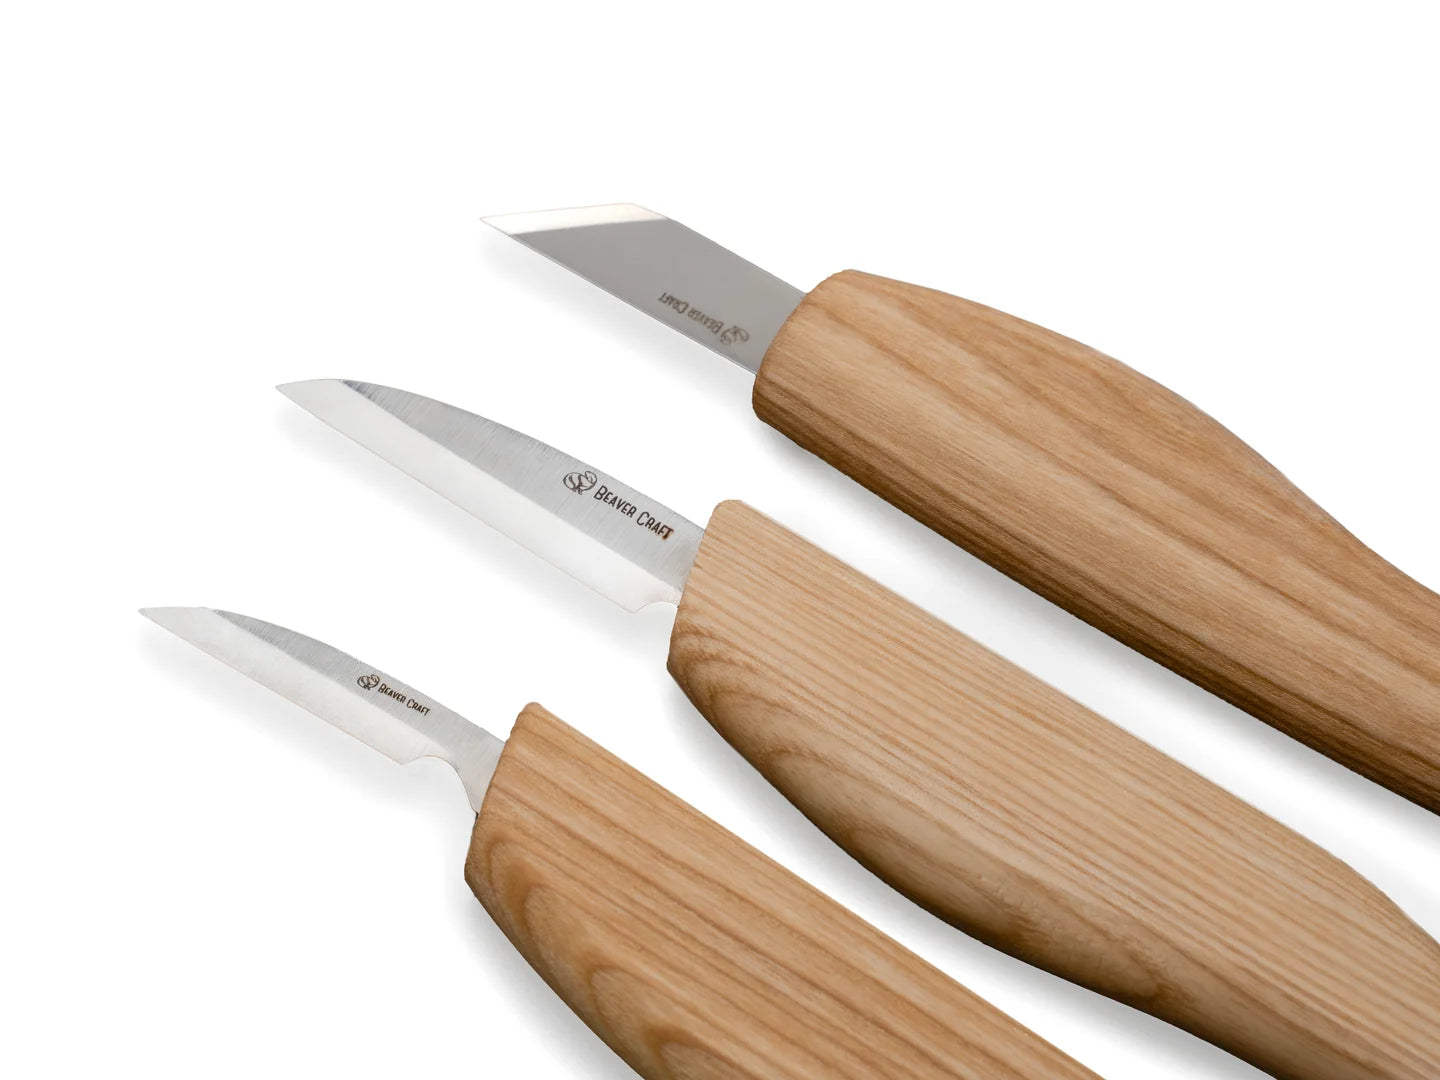 Carving knives, wood carving knives, set of 10 craft carving